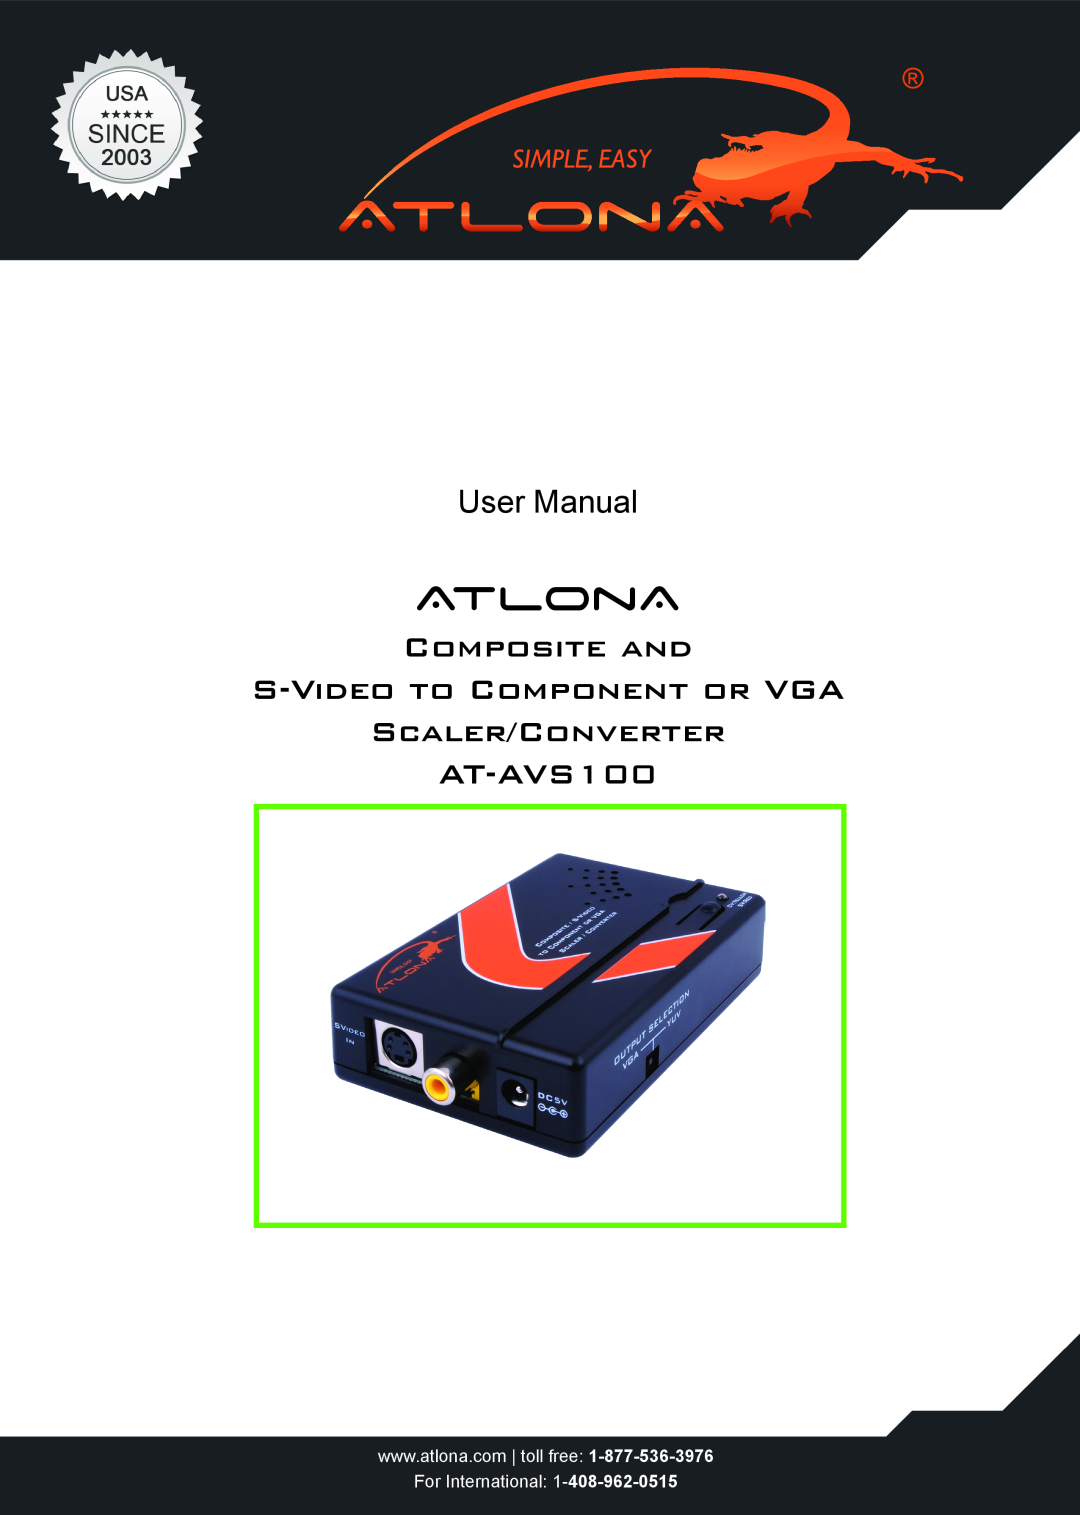 Atlona user manual AtlonA, Composite and S-Video to Component or VGA Scaler/Converter AT-AVS100, User Manual 